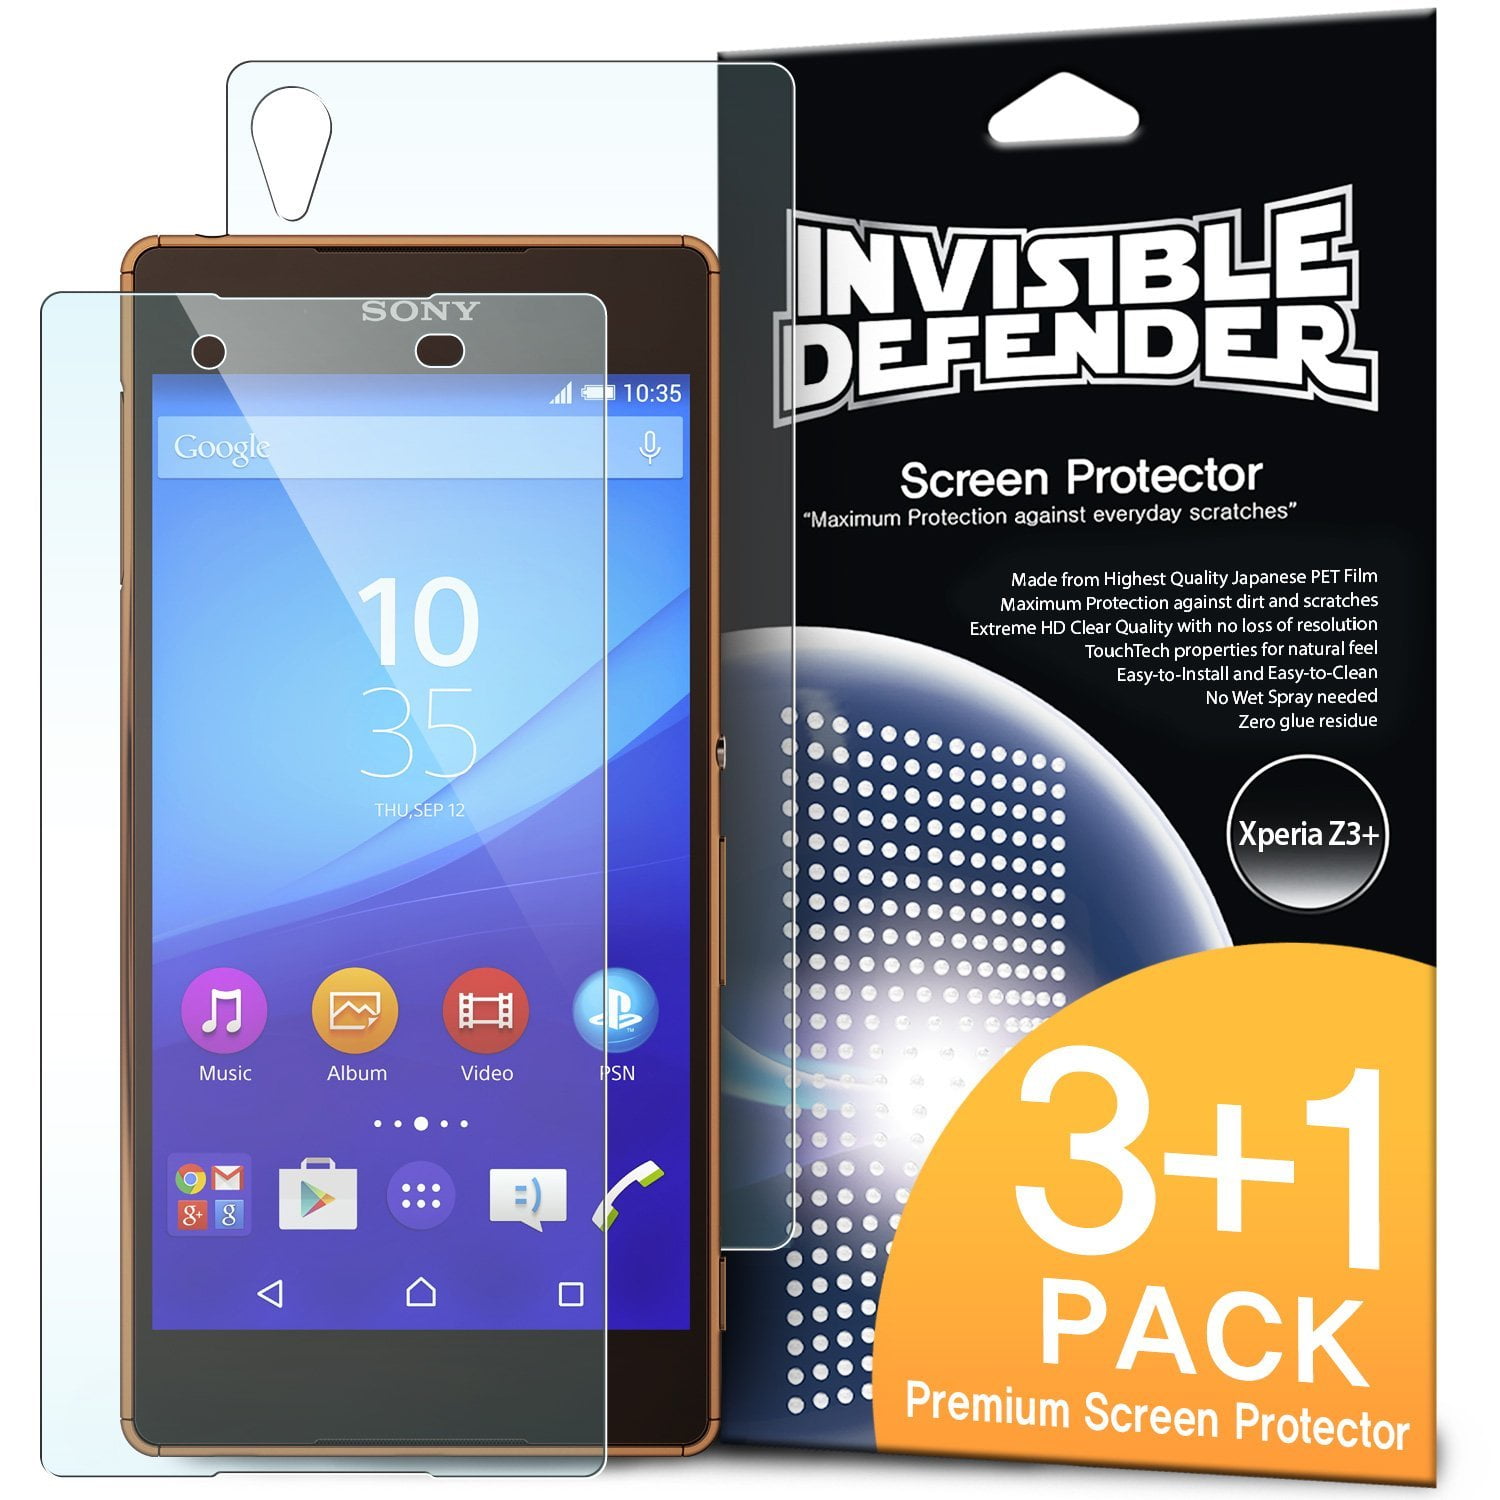 Intiem hoek Succes Xperia Z3 Plus Screen Protector - Invisible Defender [Case Friendly][3  Front+1 Back][MAX HD CLEARNESS] Perfect Touch Precision High Definition  (HD) Clear Film (4-Pack) - Walmart.com